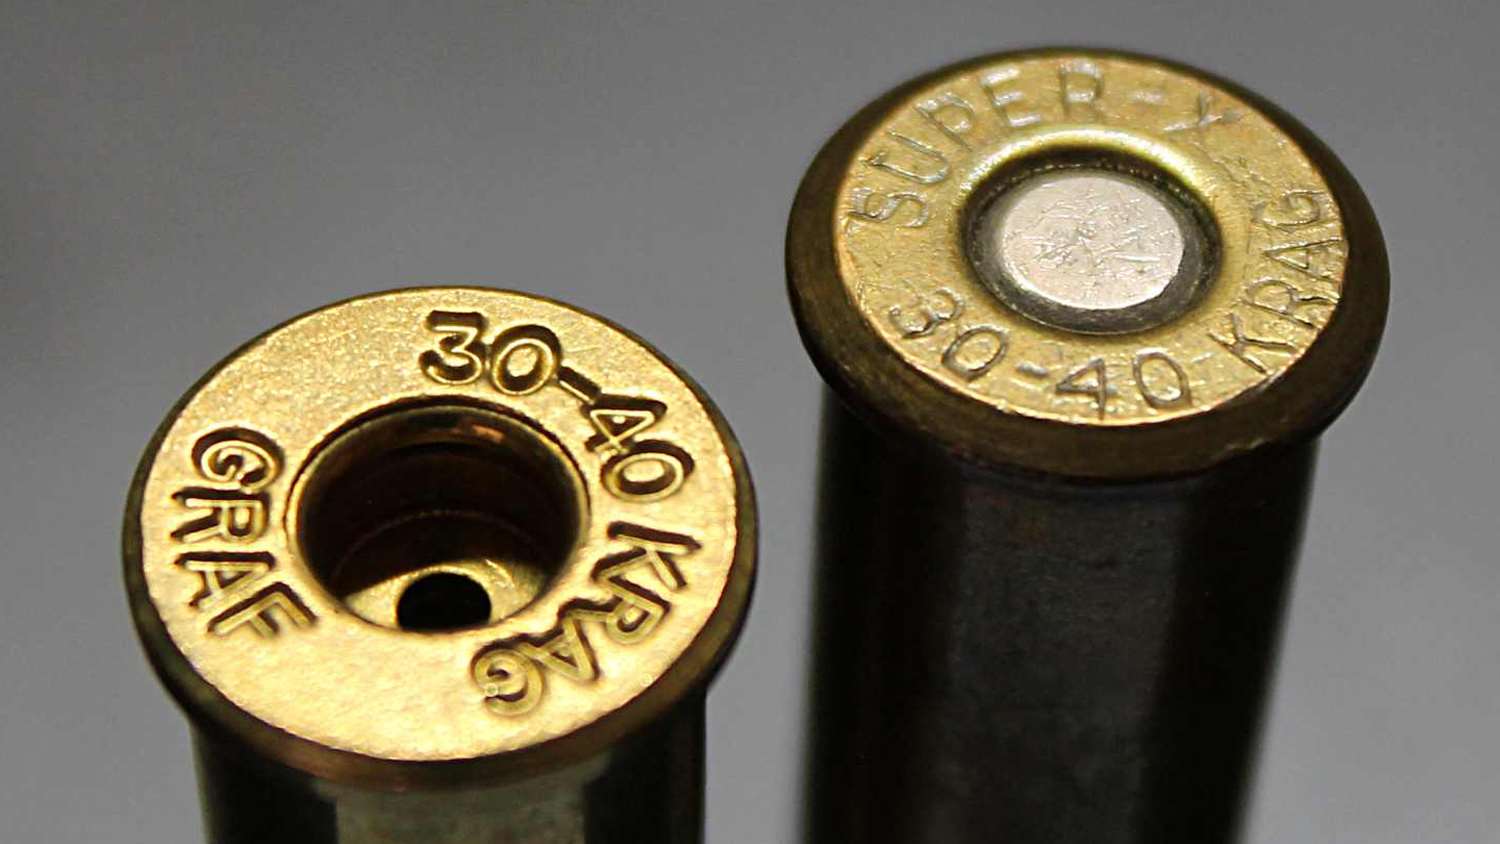 Compared to the Graf .30-40 case (l.), an older Winchester case (r.) has a pronounced rim bevel.